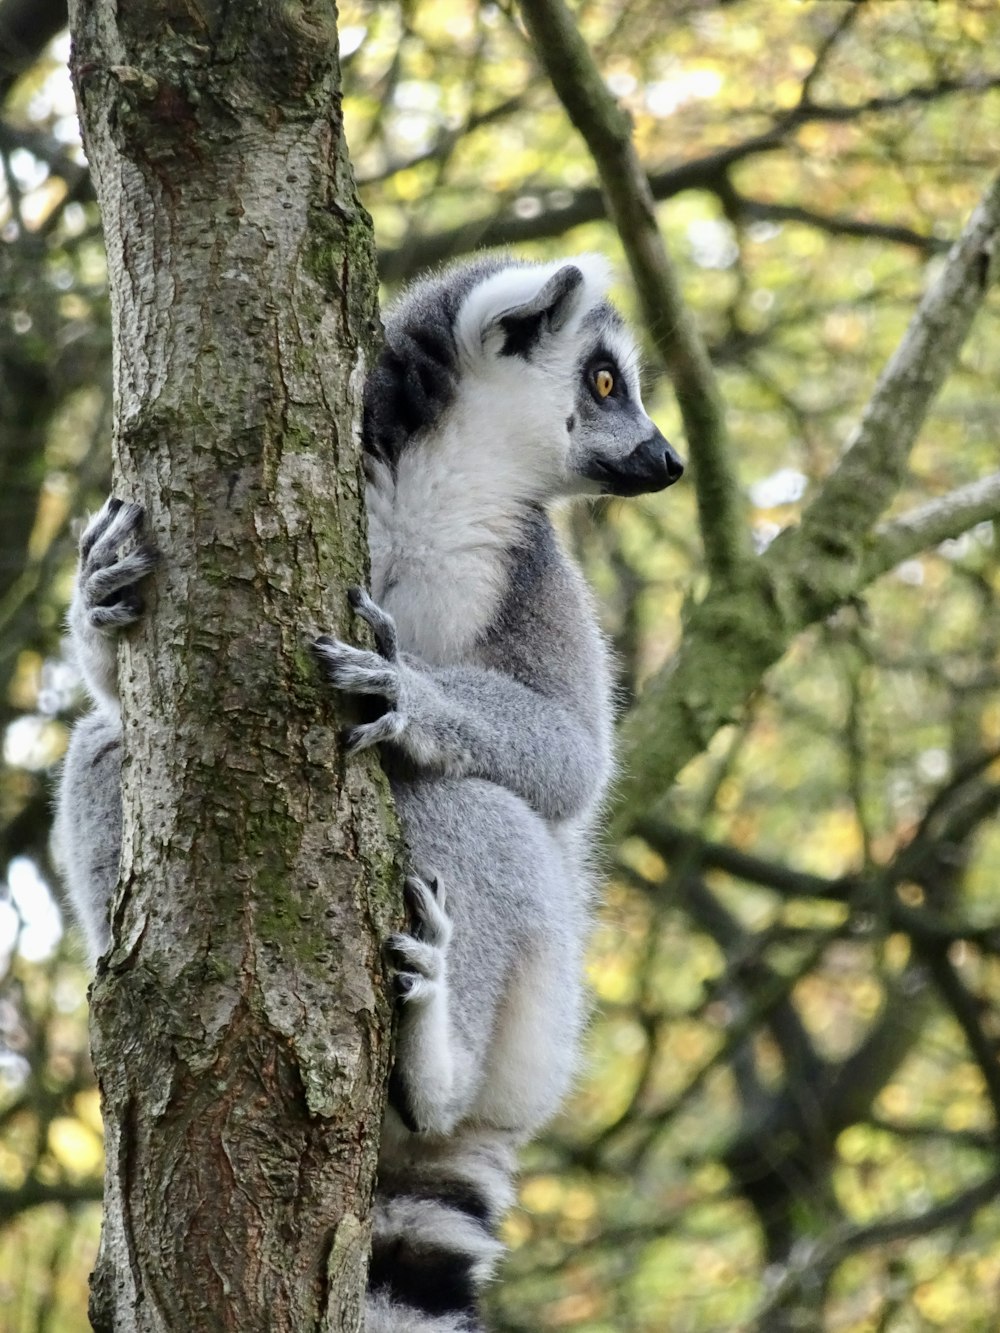 a lemur sitting on a tree branch in a forest